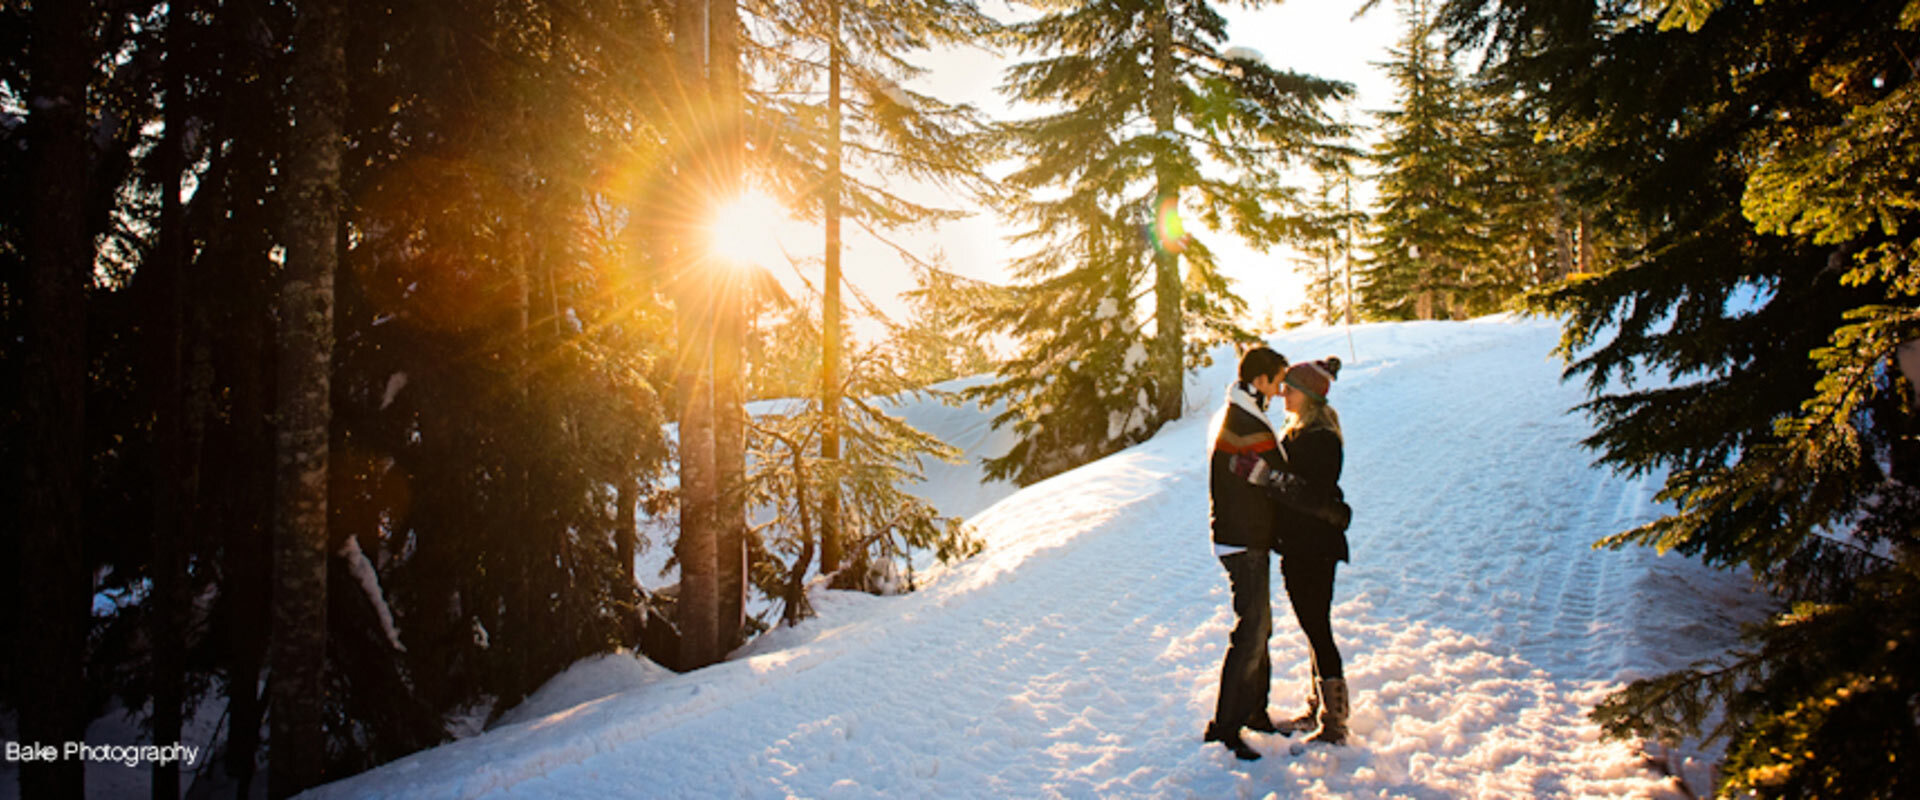 Extra special Valentine's Day at Grouse Mountain's Gala